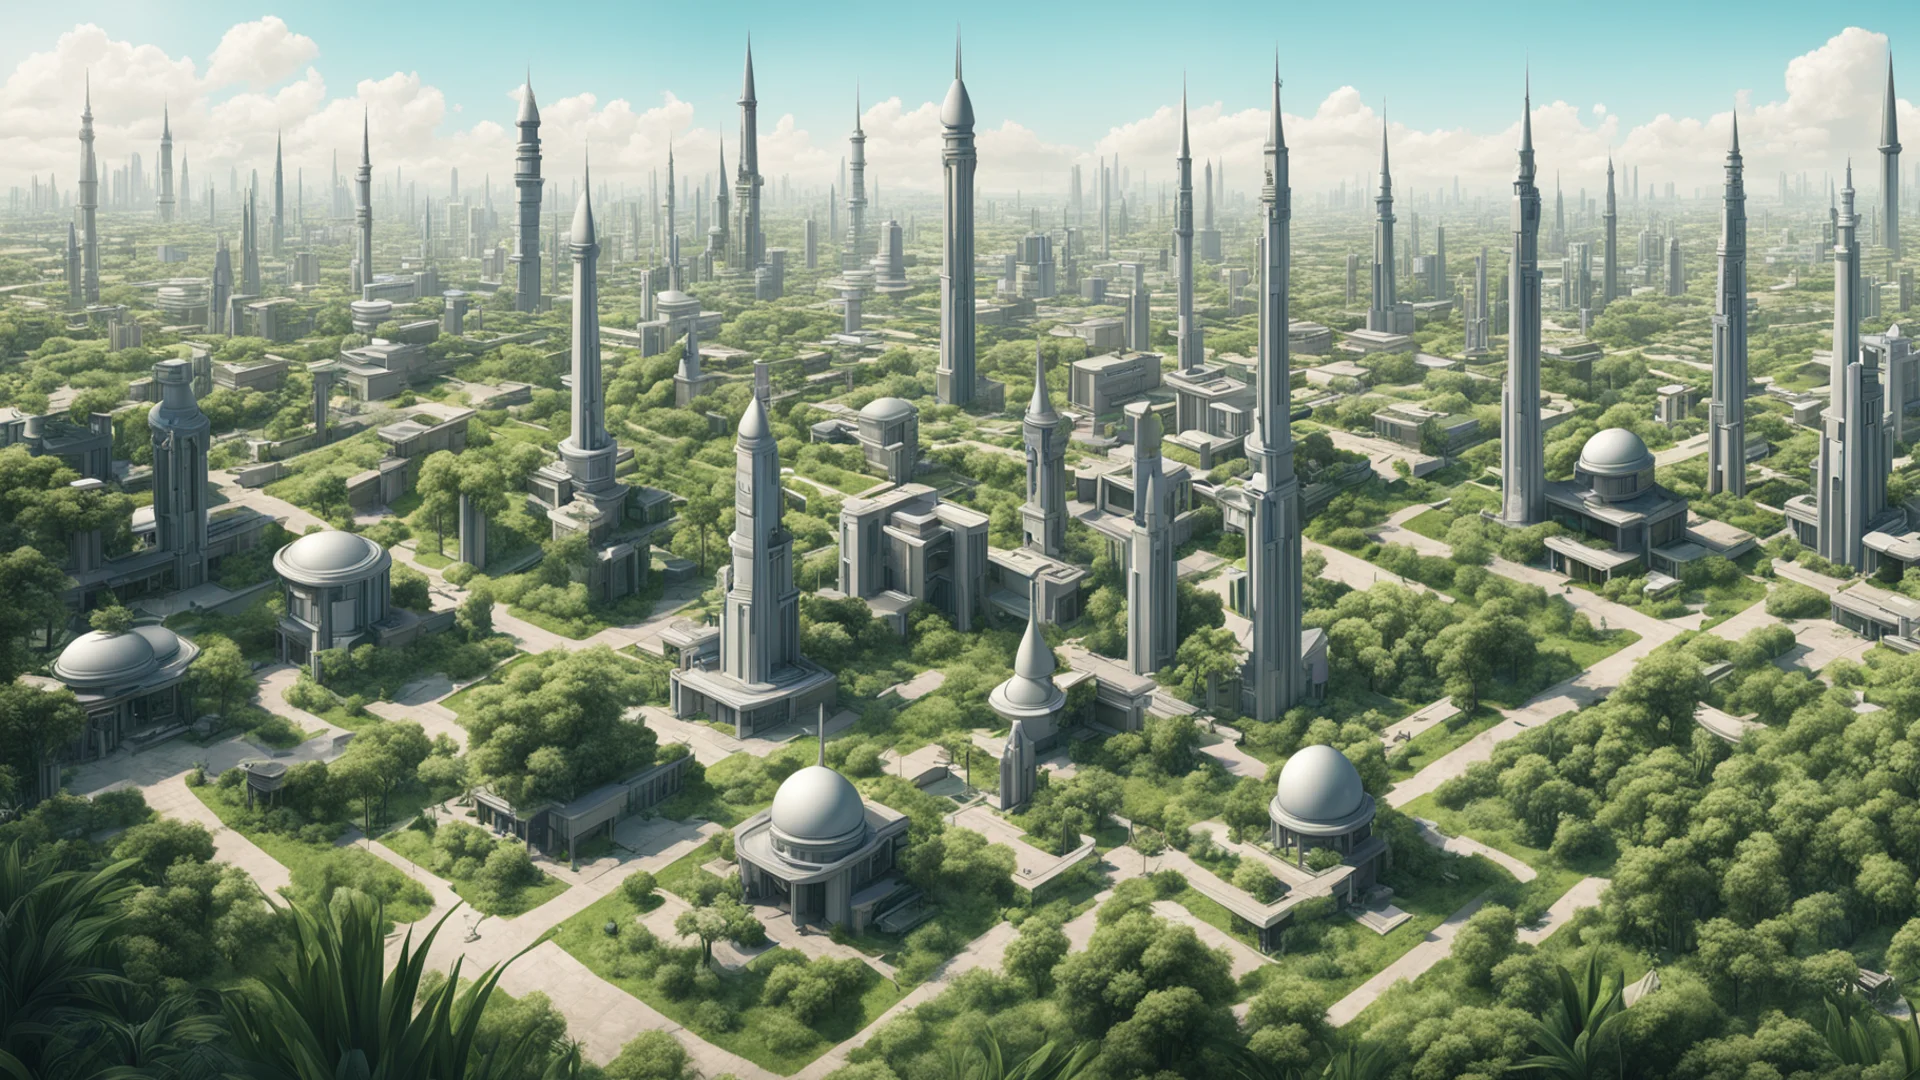 highly detailed futuristic suburban area with a minaret in between and vegetation in forms of buildings   wide